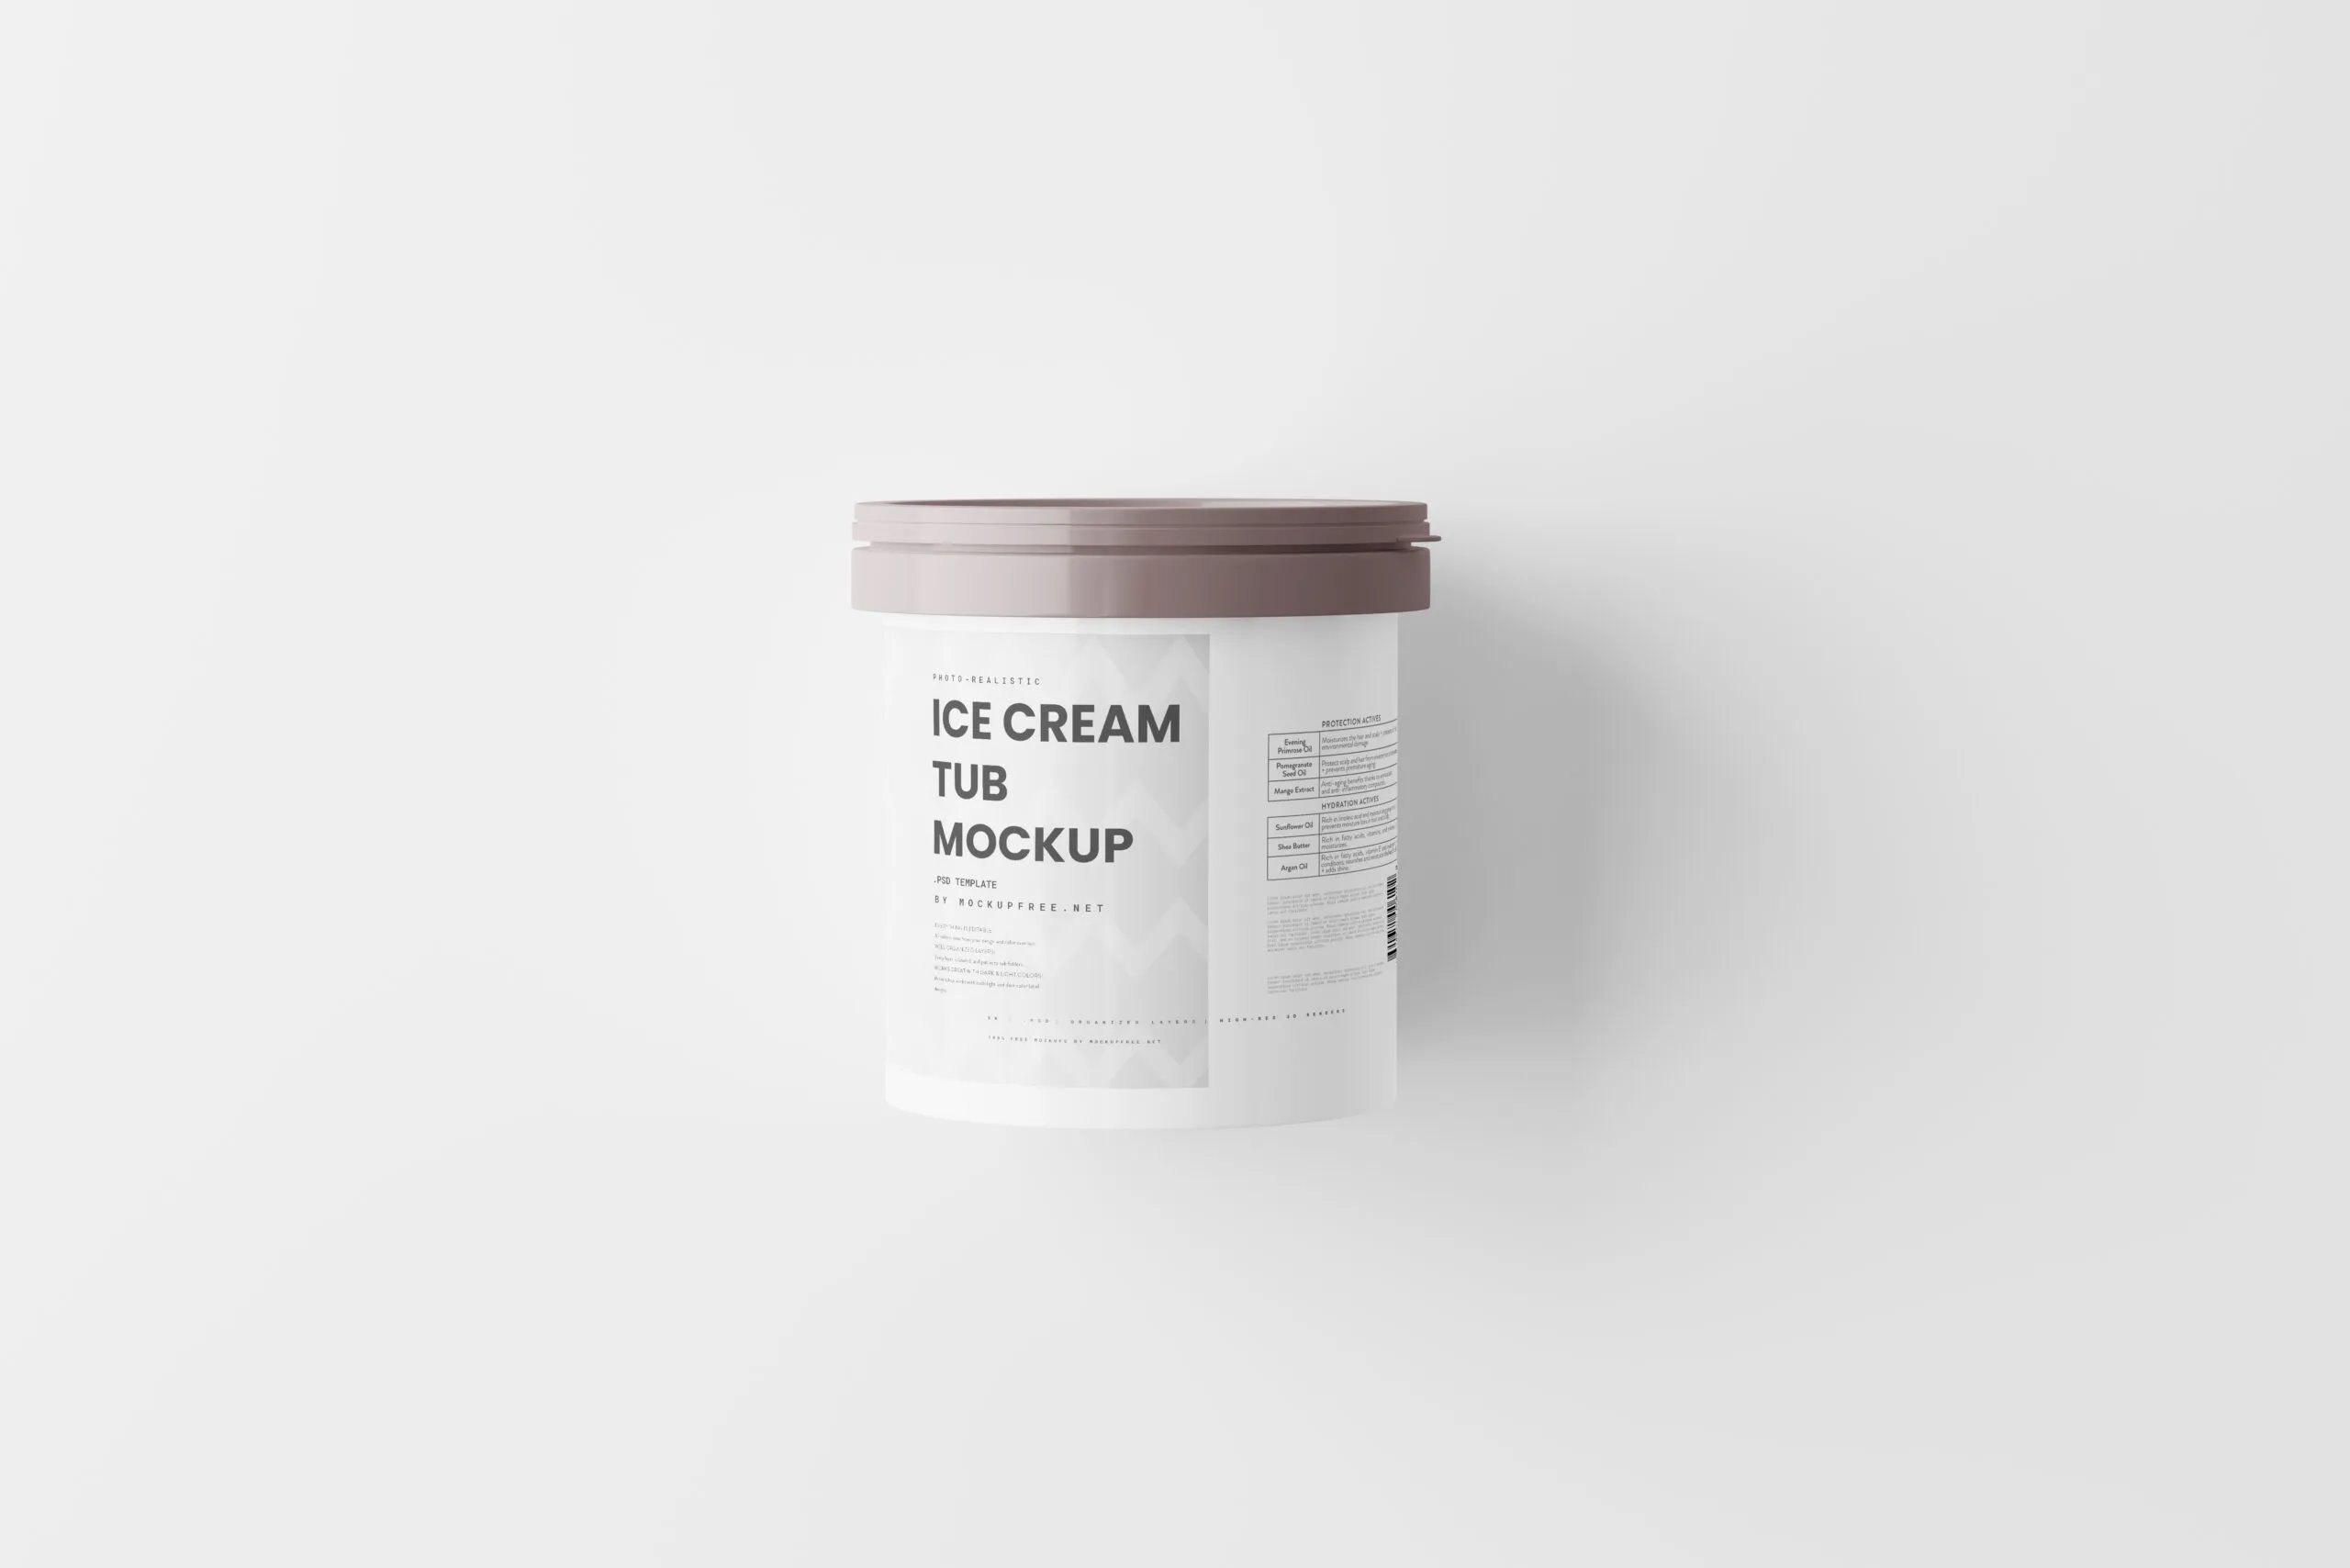 8 Ice Cream Container Tub Mockups in Varied Views FREE PSD